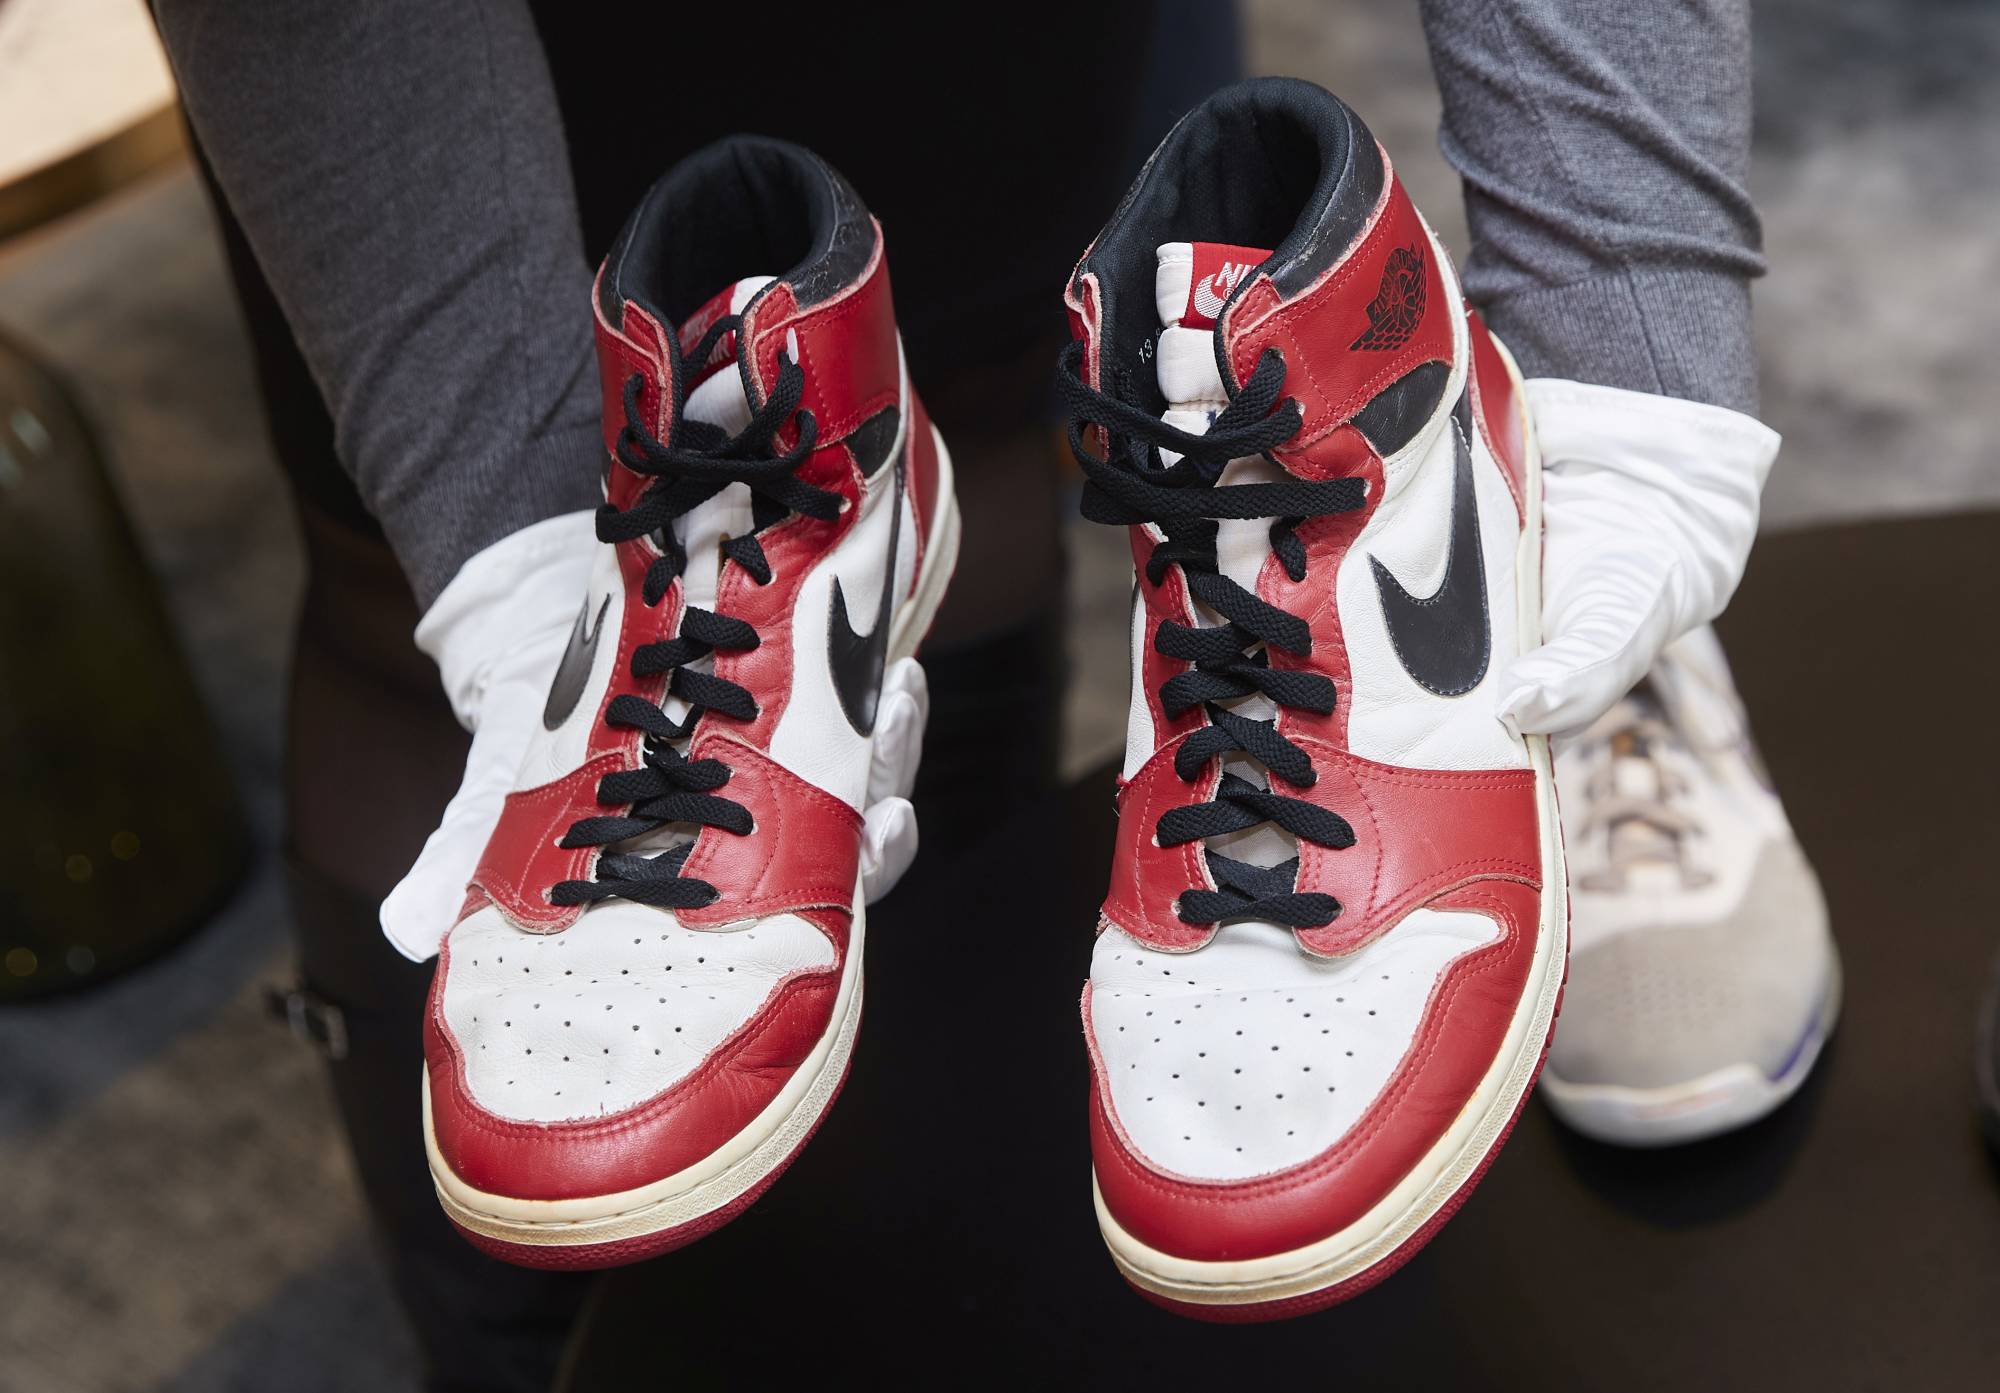 Michael Jordan NBA rookie Nike shoes sell for record at auction